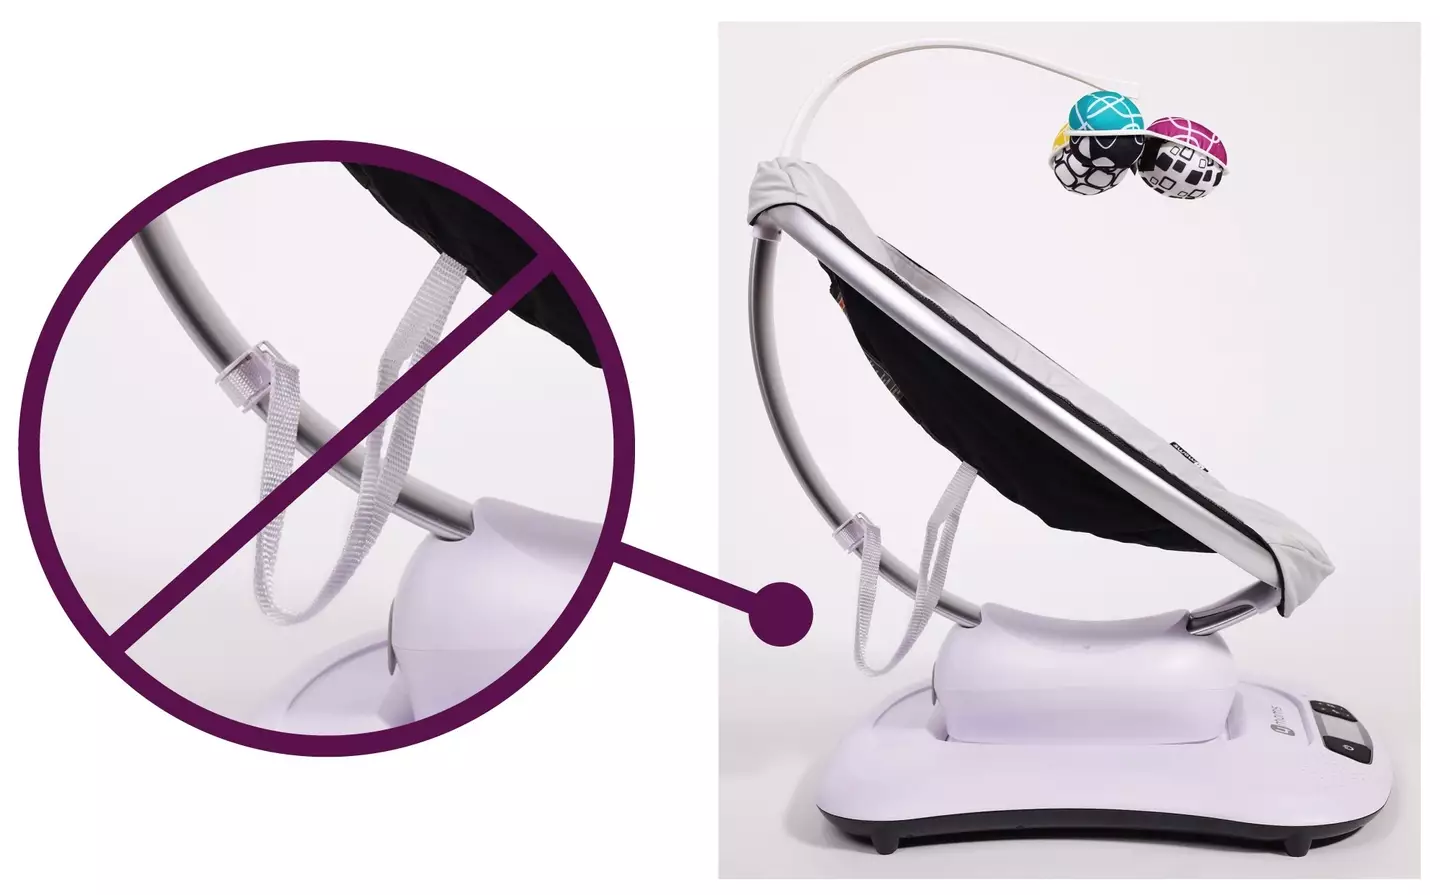 Over two million infant swings and rockers have been recalled for safety reasons.